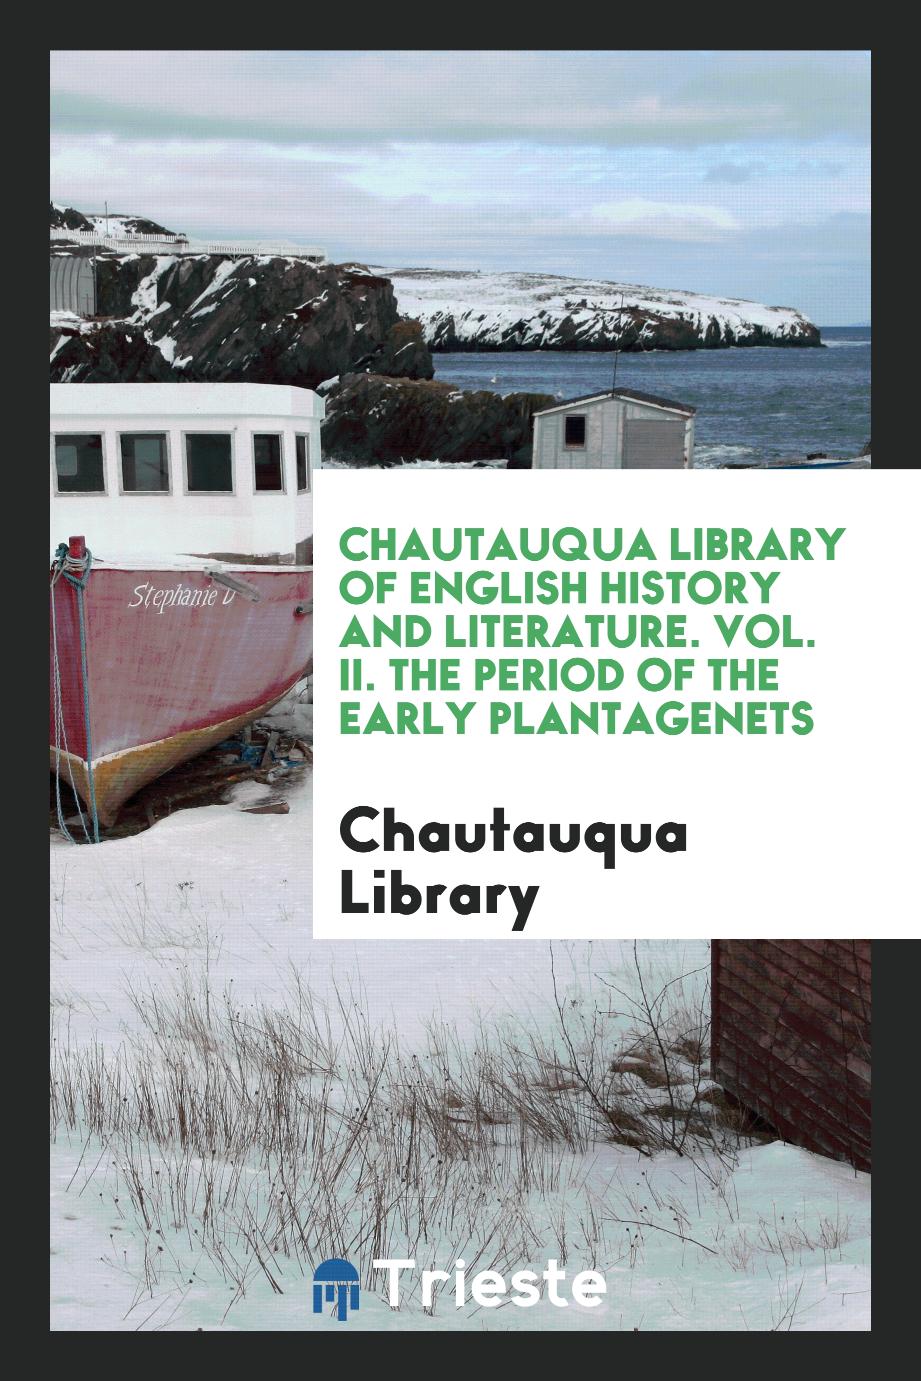 Chautauqua Library of English History and Literature. Vol. II. The Period of the Early Plantagenets